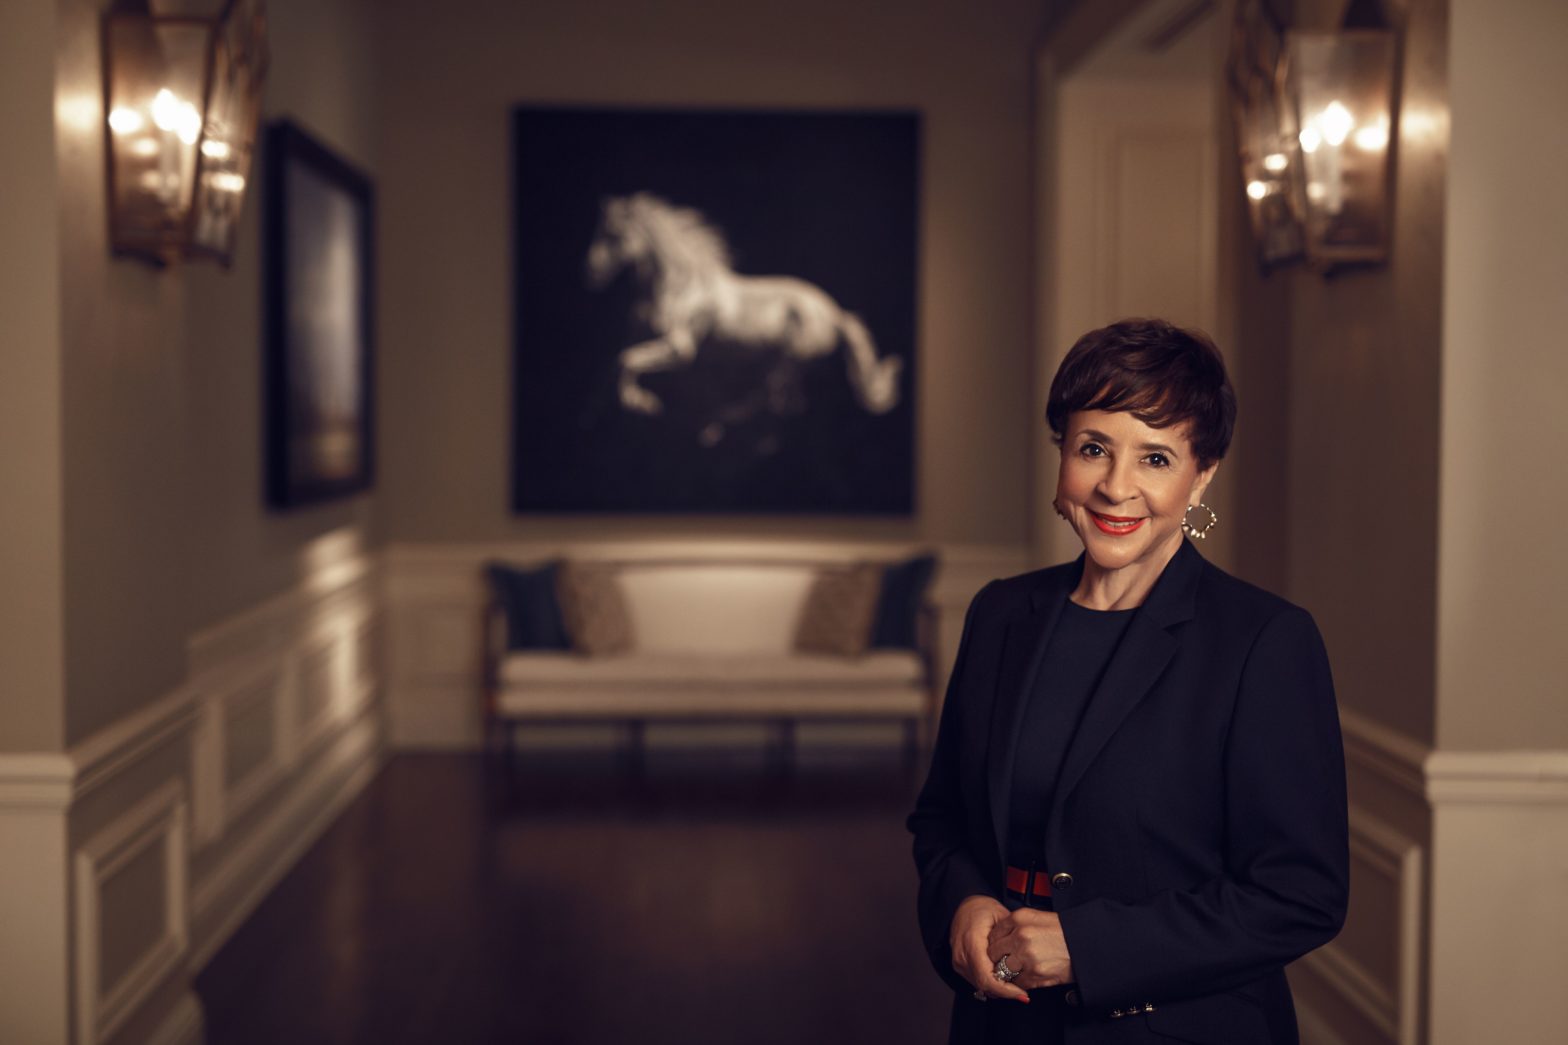 BET Co-Founder, Sheila Johnson, Is Expanding The Salamander Hotel Brand